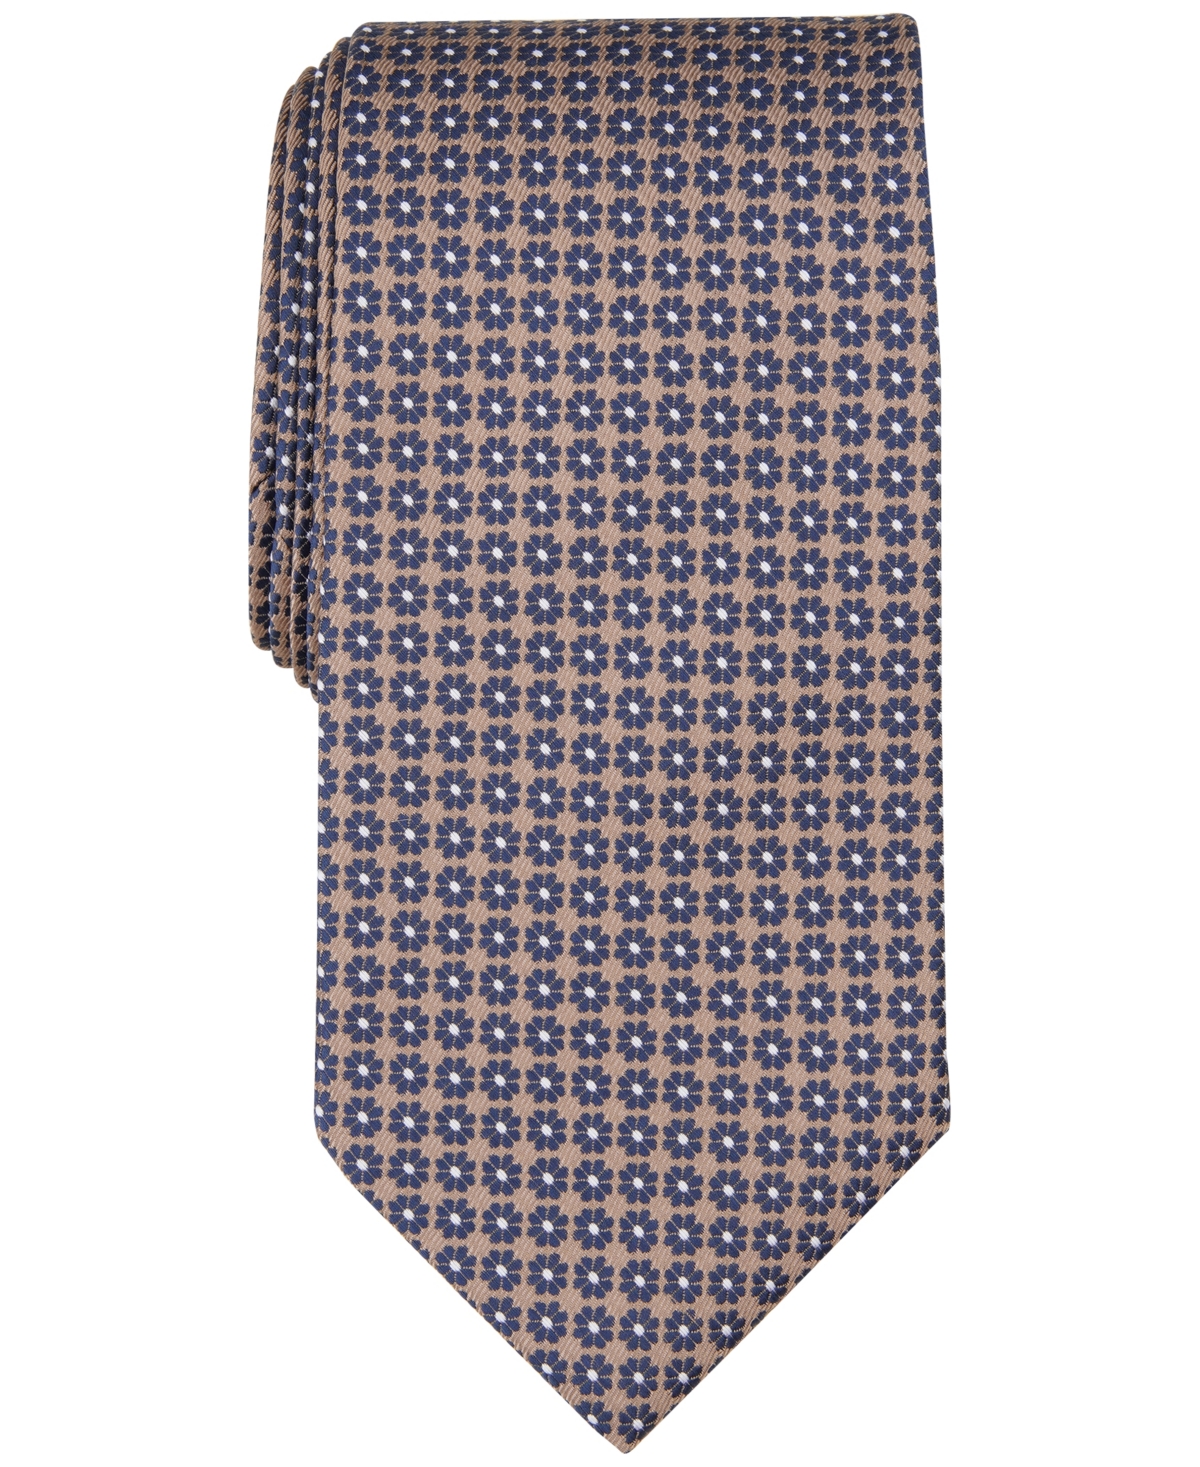 Men's Seigal Medallion Tie, Created for Macy's - Taupe